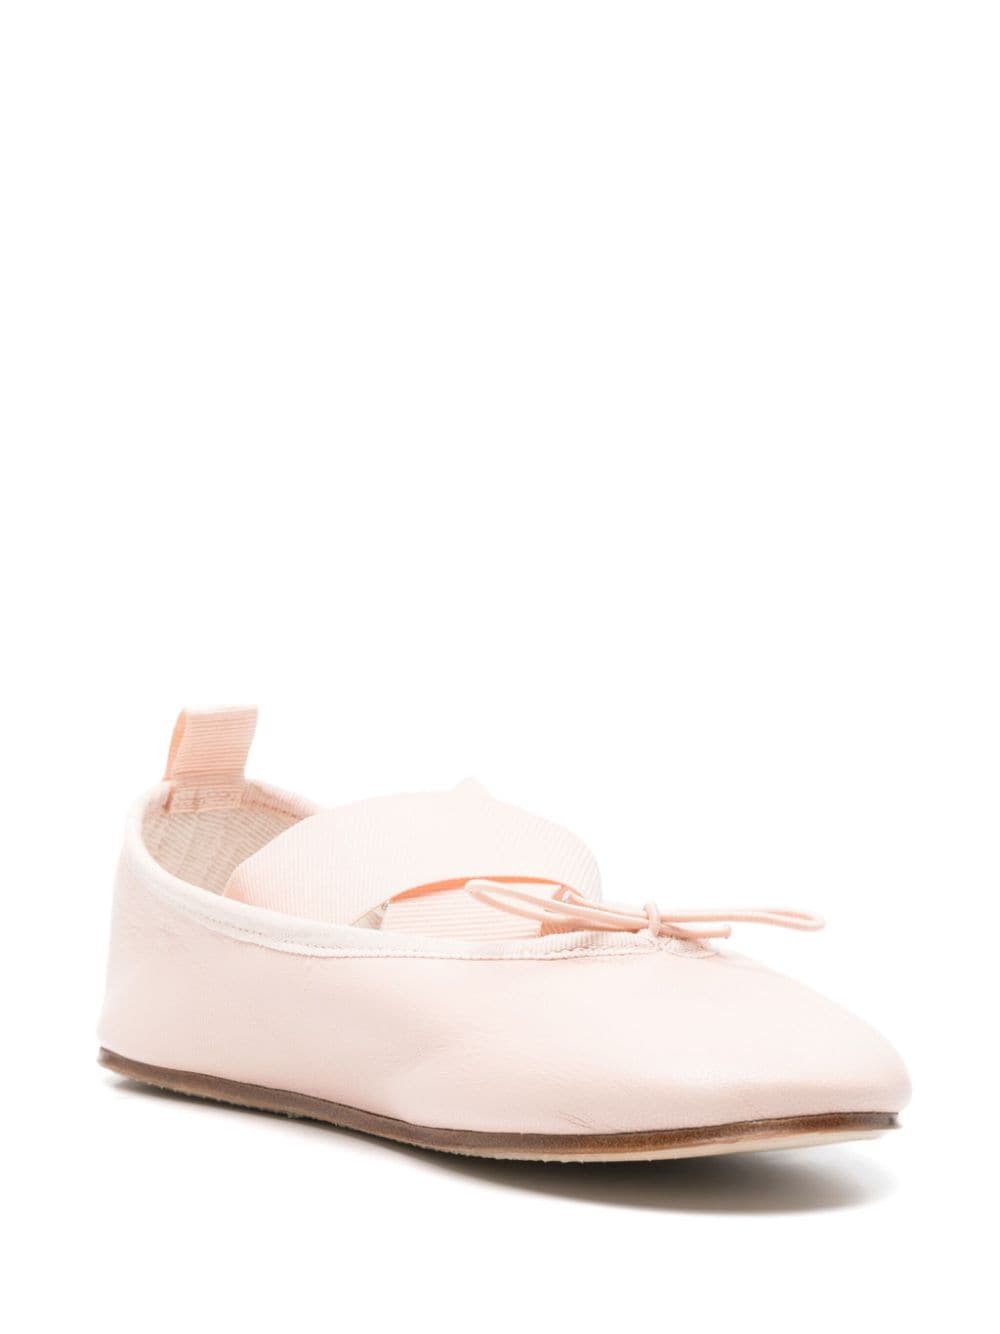 Image 2 of Repetto Gianna leather ballerina shoes